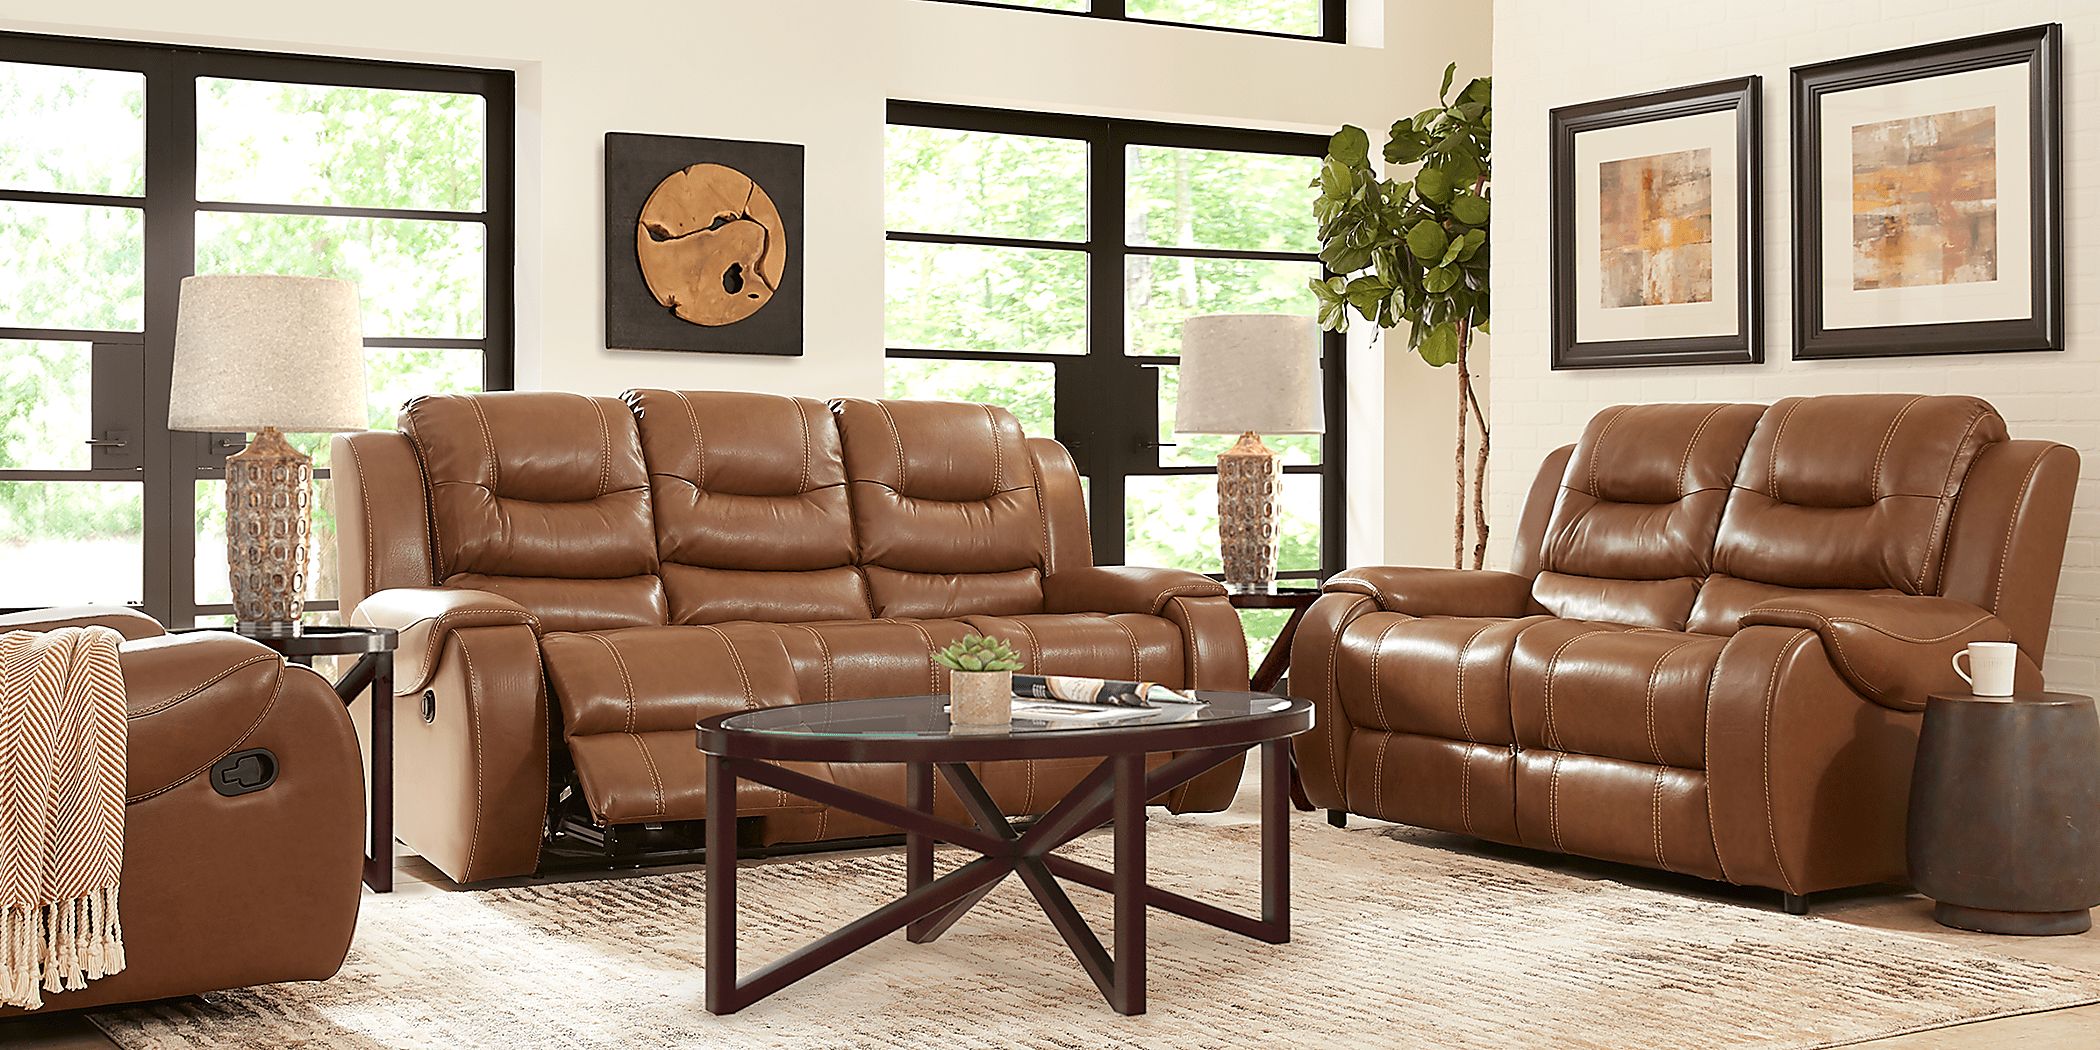 High Plains Saddle Leather 5 Pc Living Room with Reclining Sofa